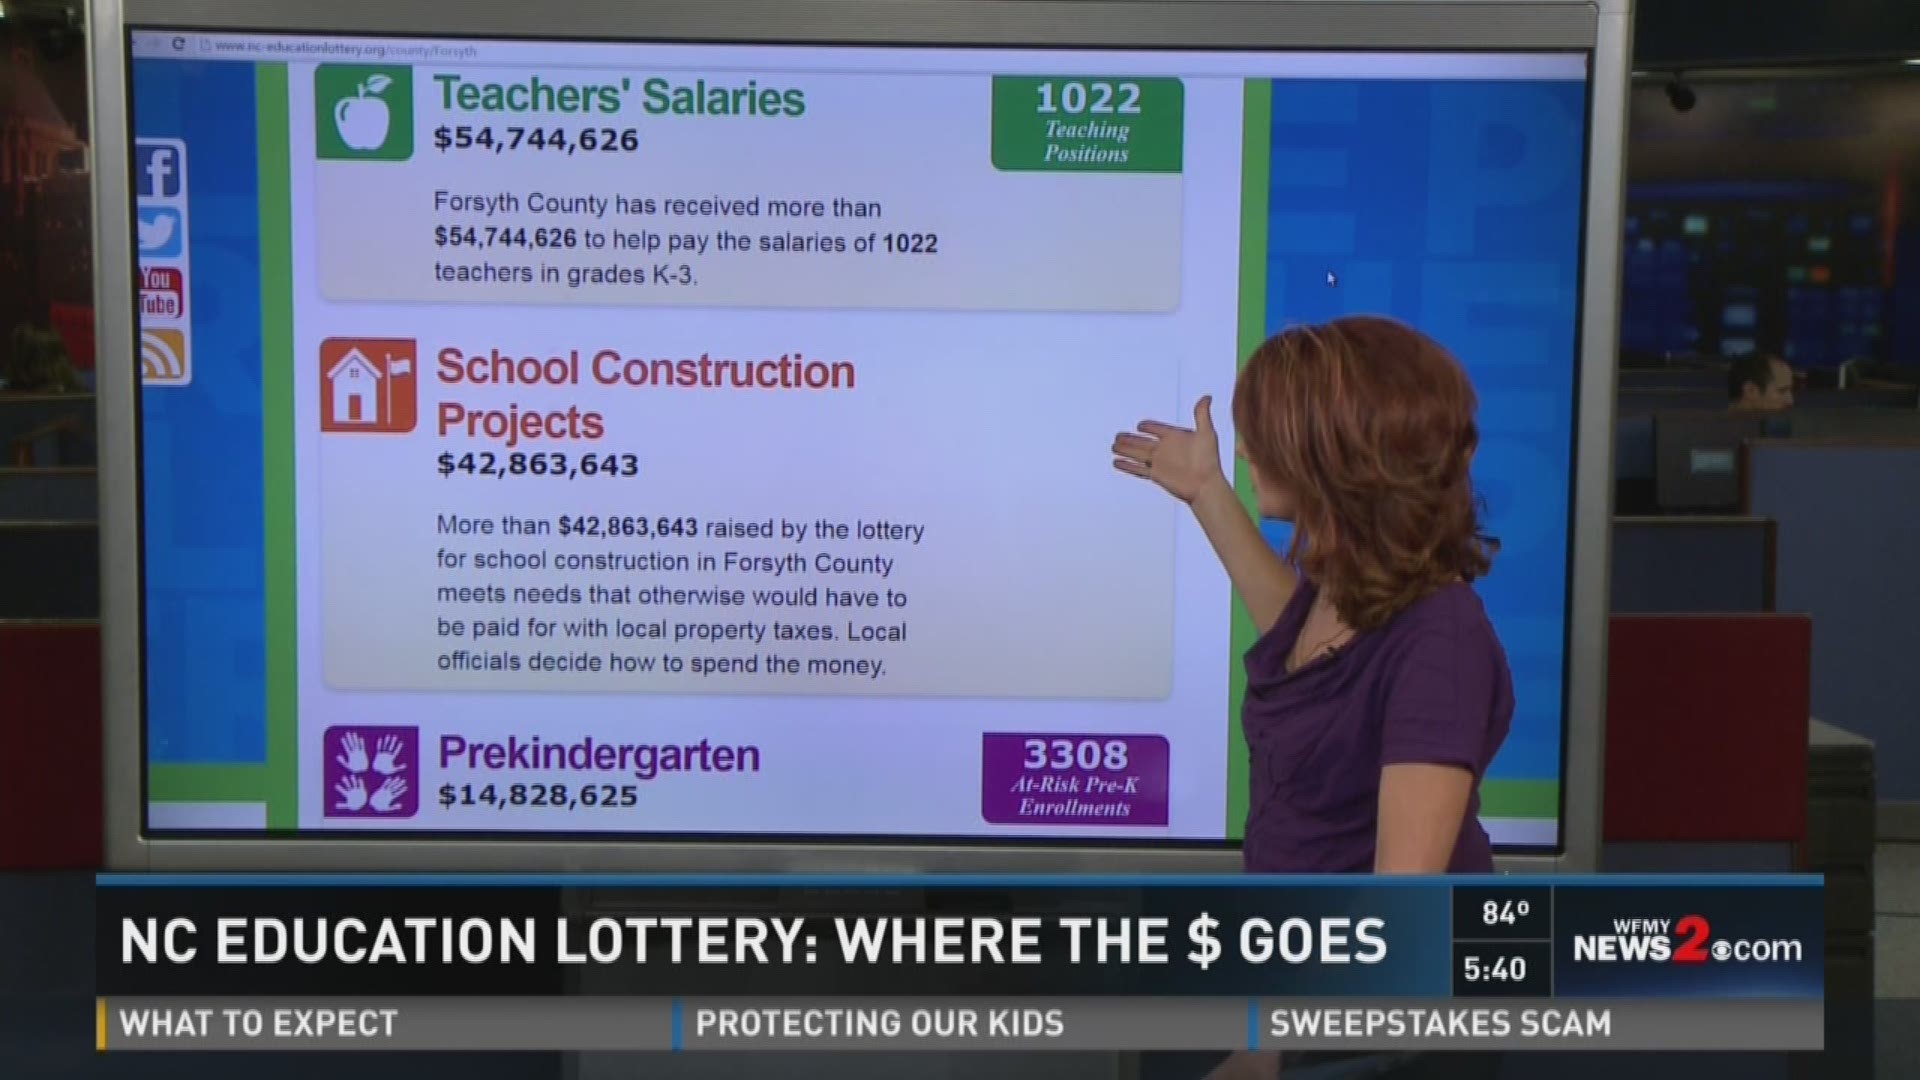 NC Education Lottery: Where The $ Goes